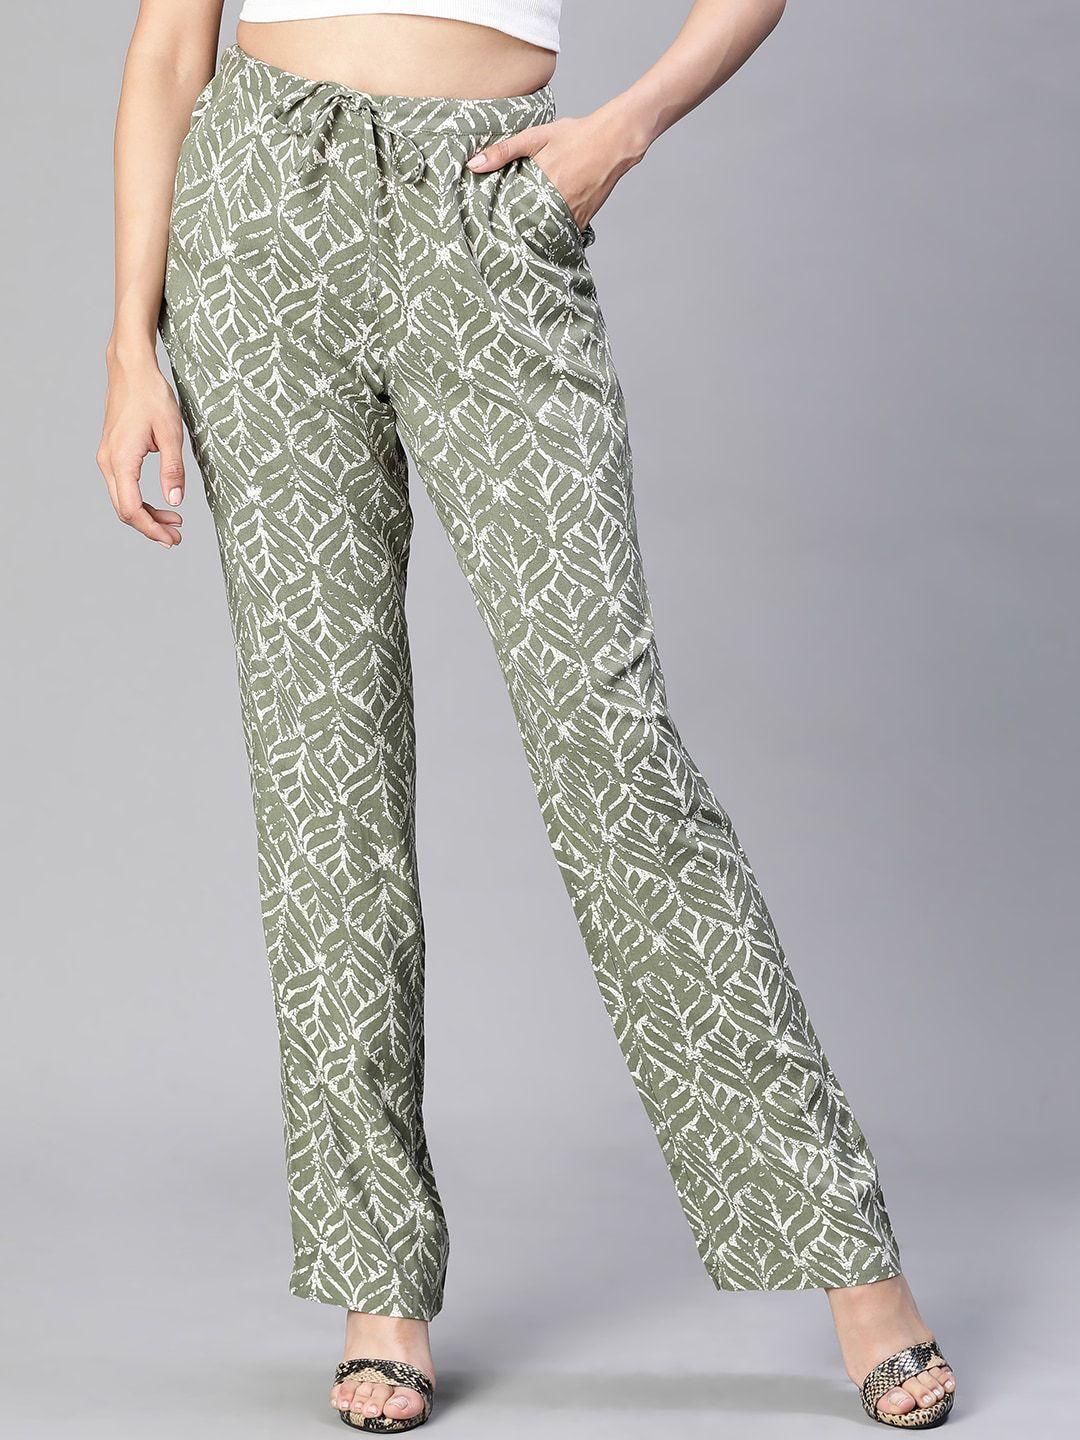 oxolloxo women floral printed relaxed loose fit easy wash trousers